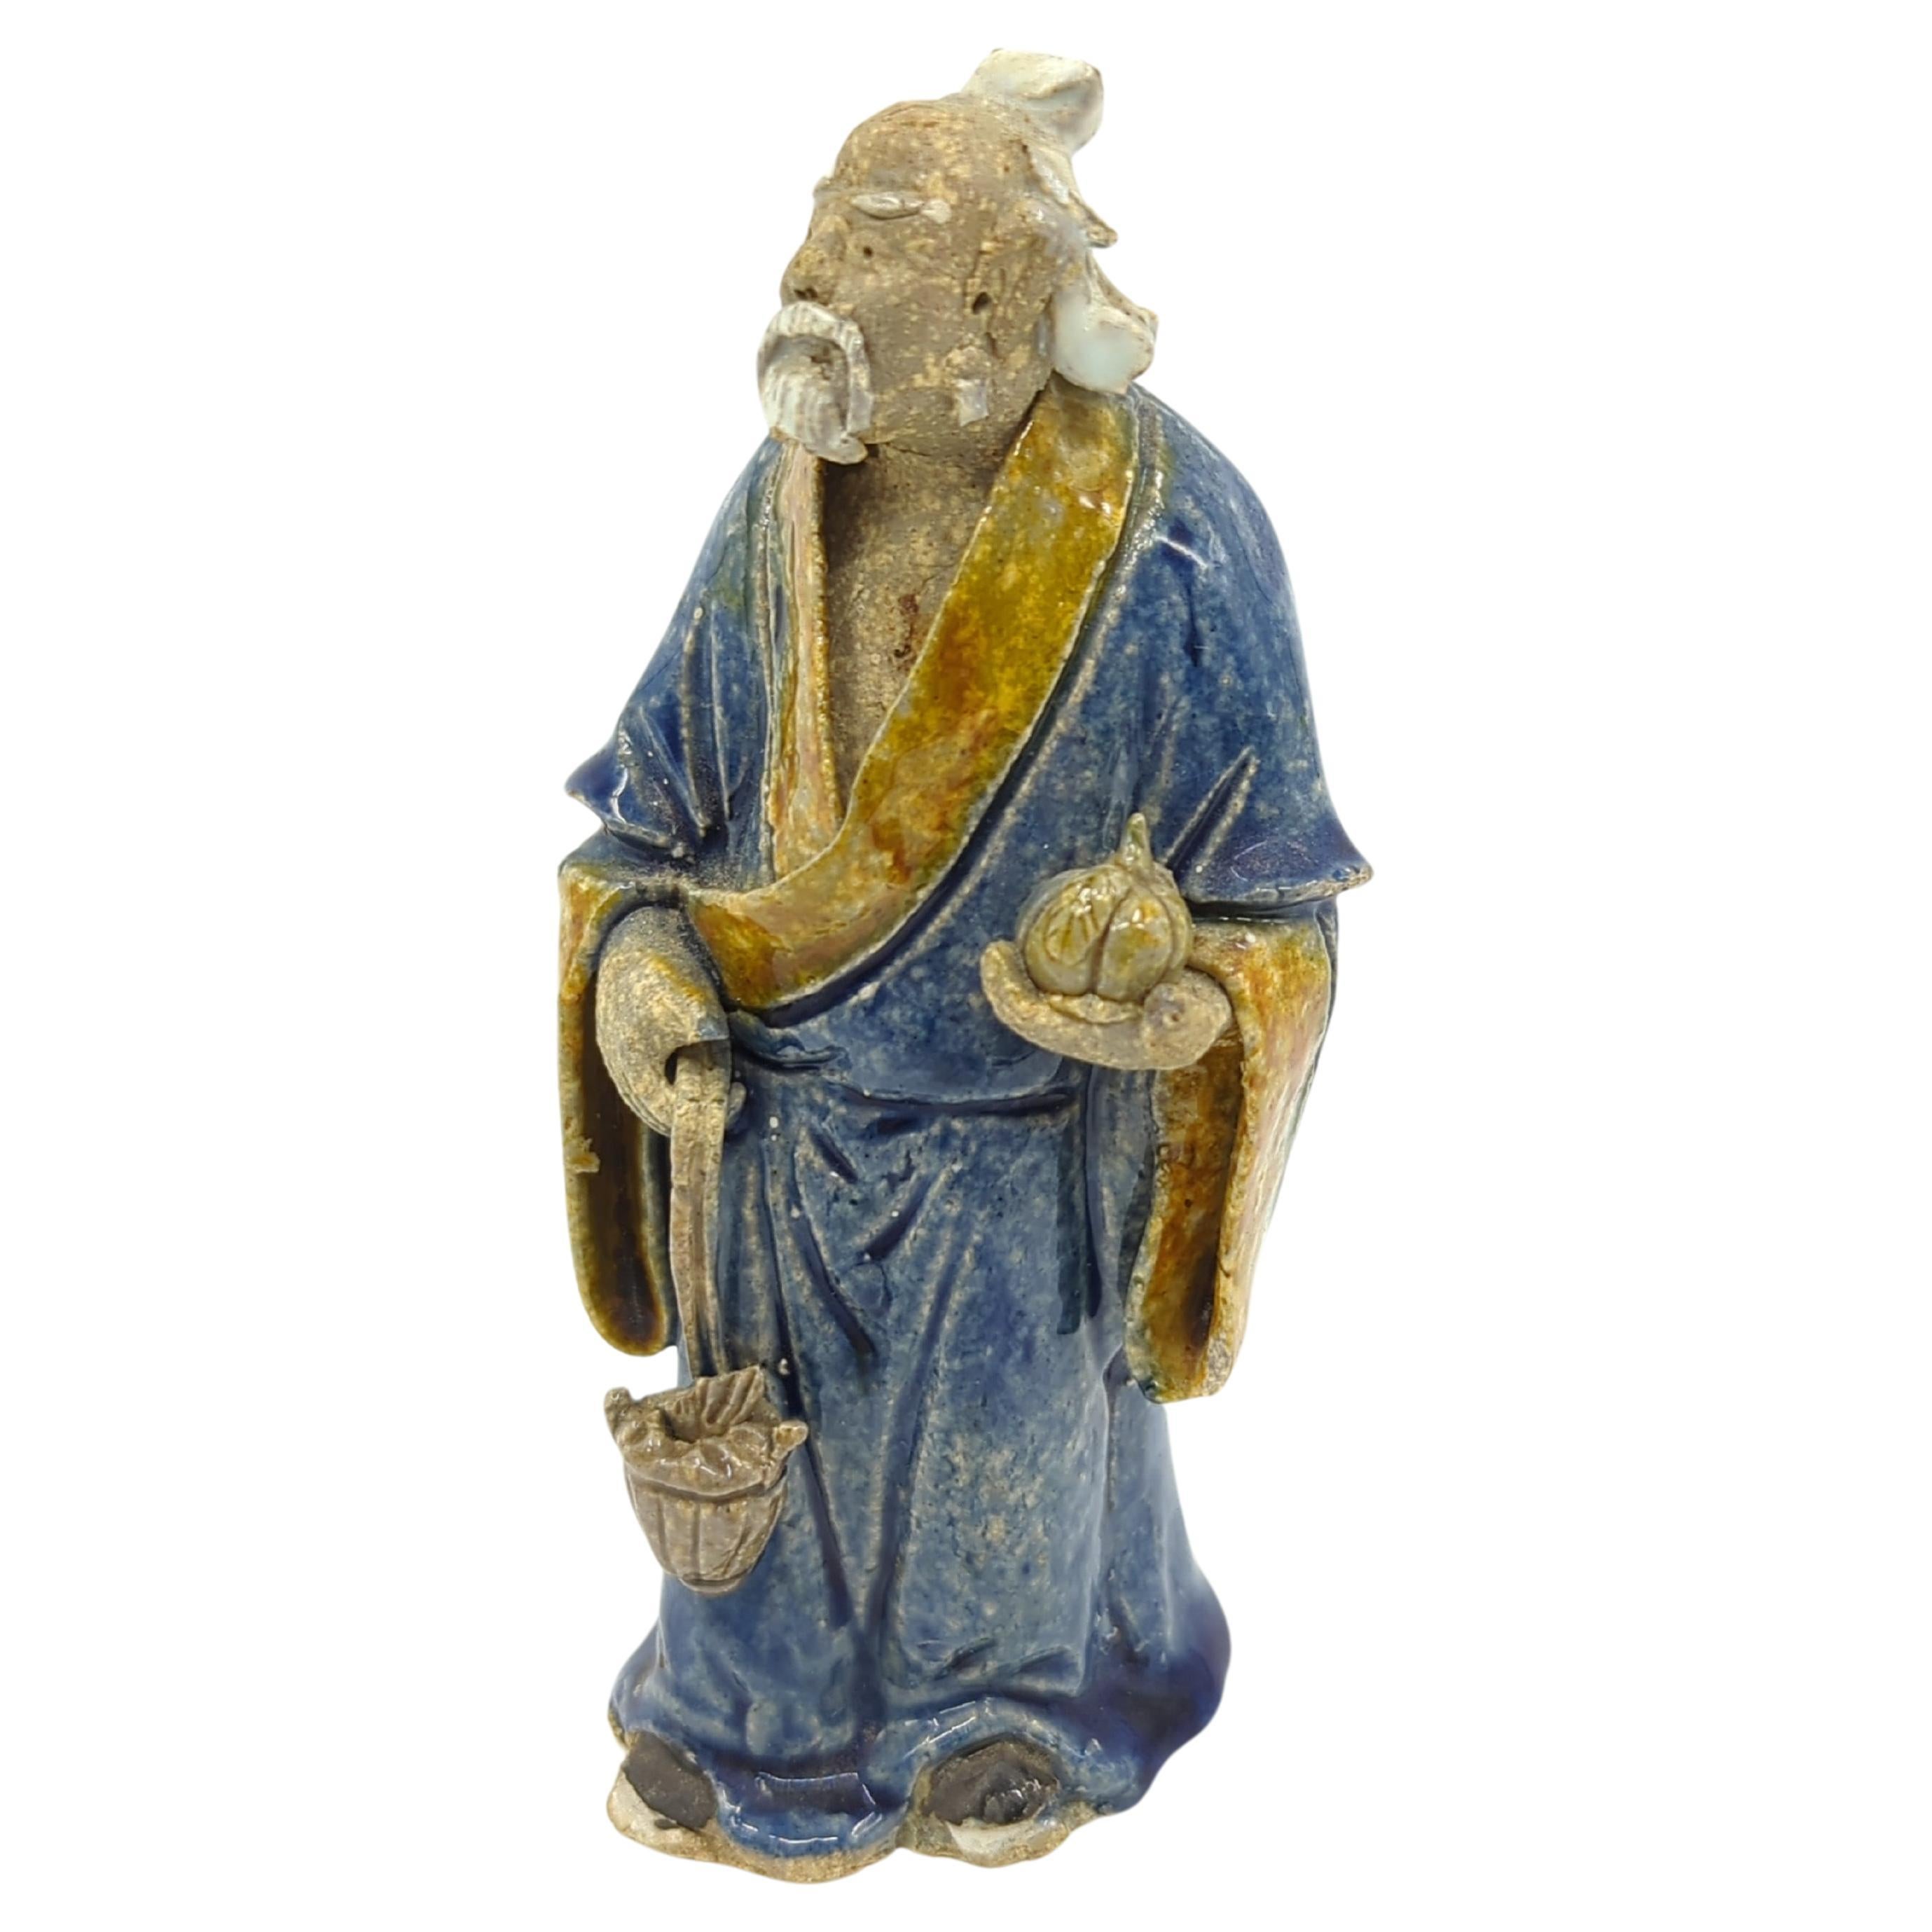 Antique Chinese hand made mud man figurine, finely crafted and hand painted, of a standing elderly scholar dressed in a blue robe, holding a large lobed gourd in the palm of one hand while carrying a filled fish basket in the other. The figure holds